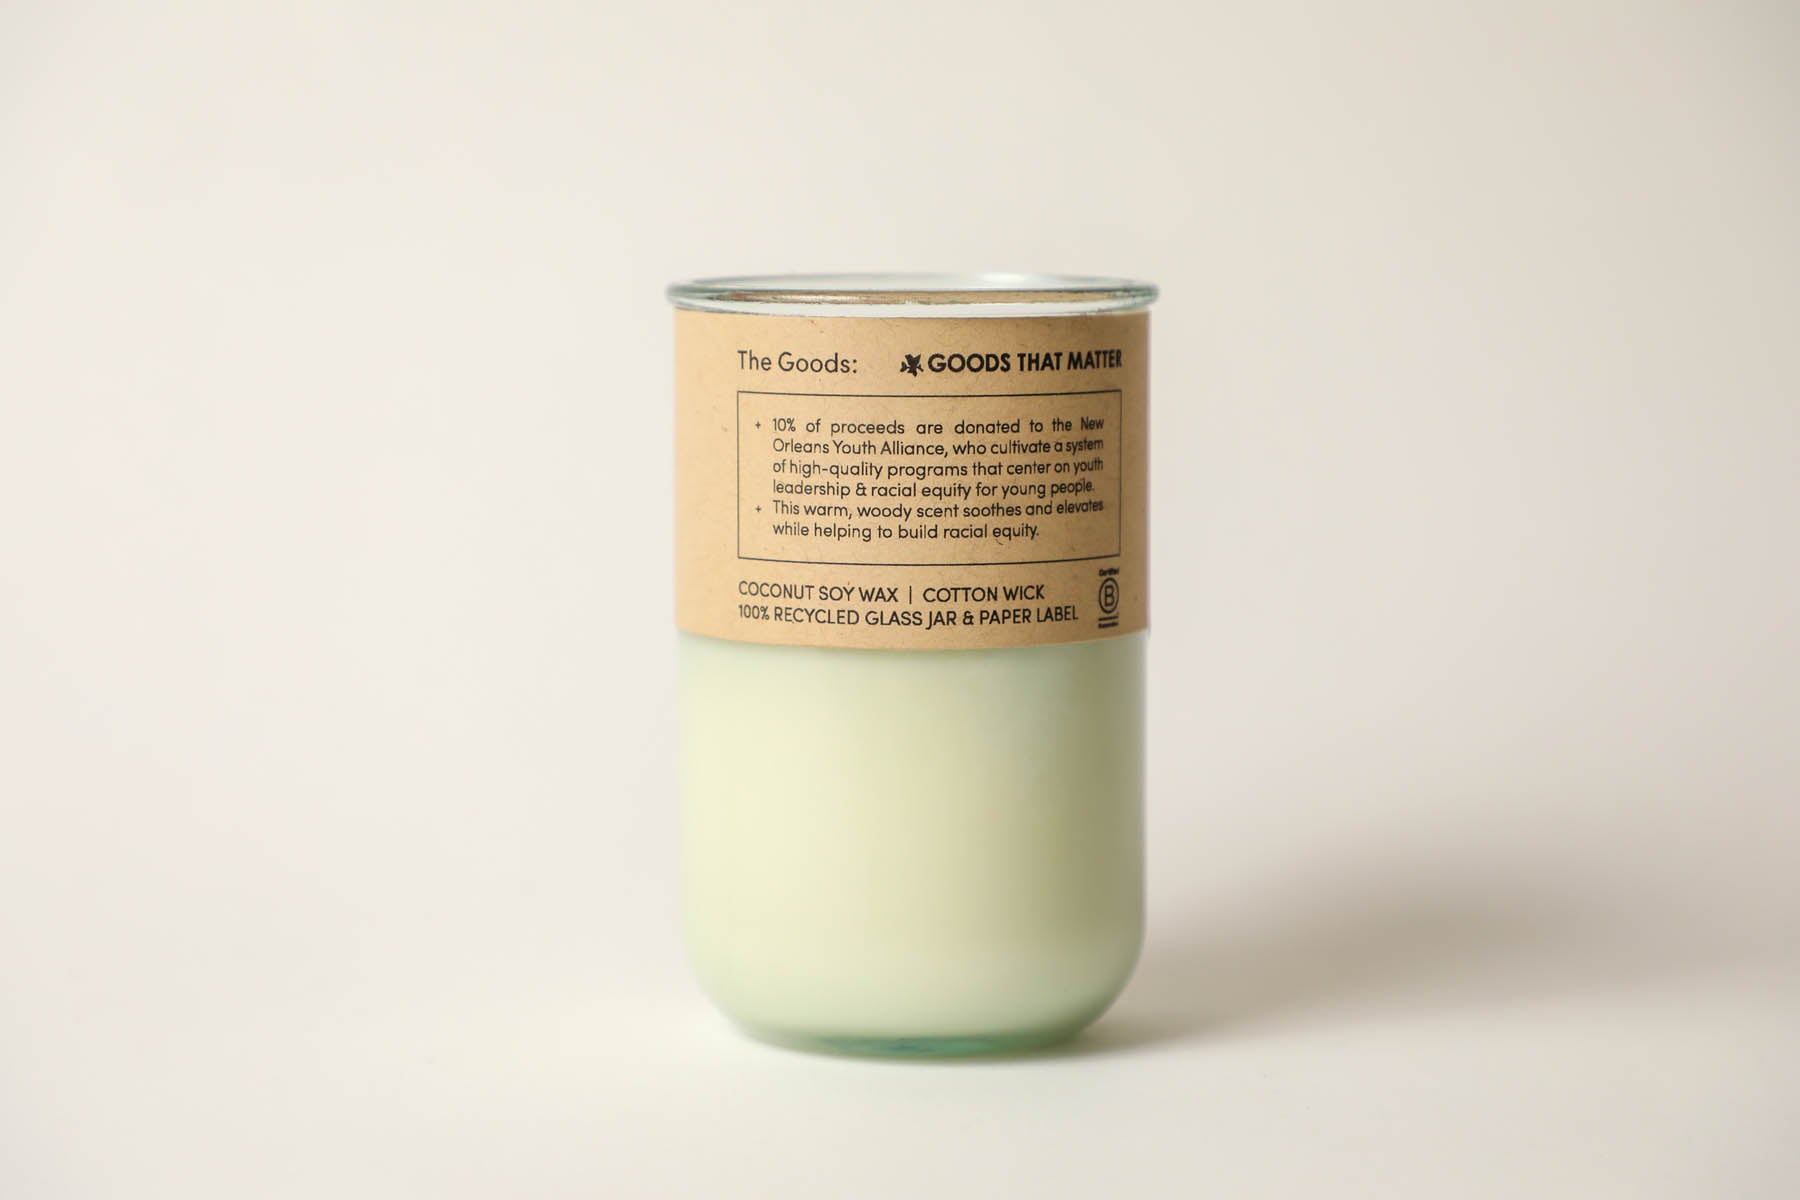 Action, Racial Equity / Vetiver Scent: Candles for Good